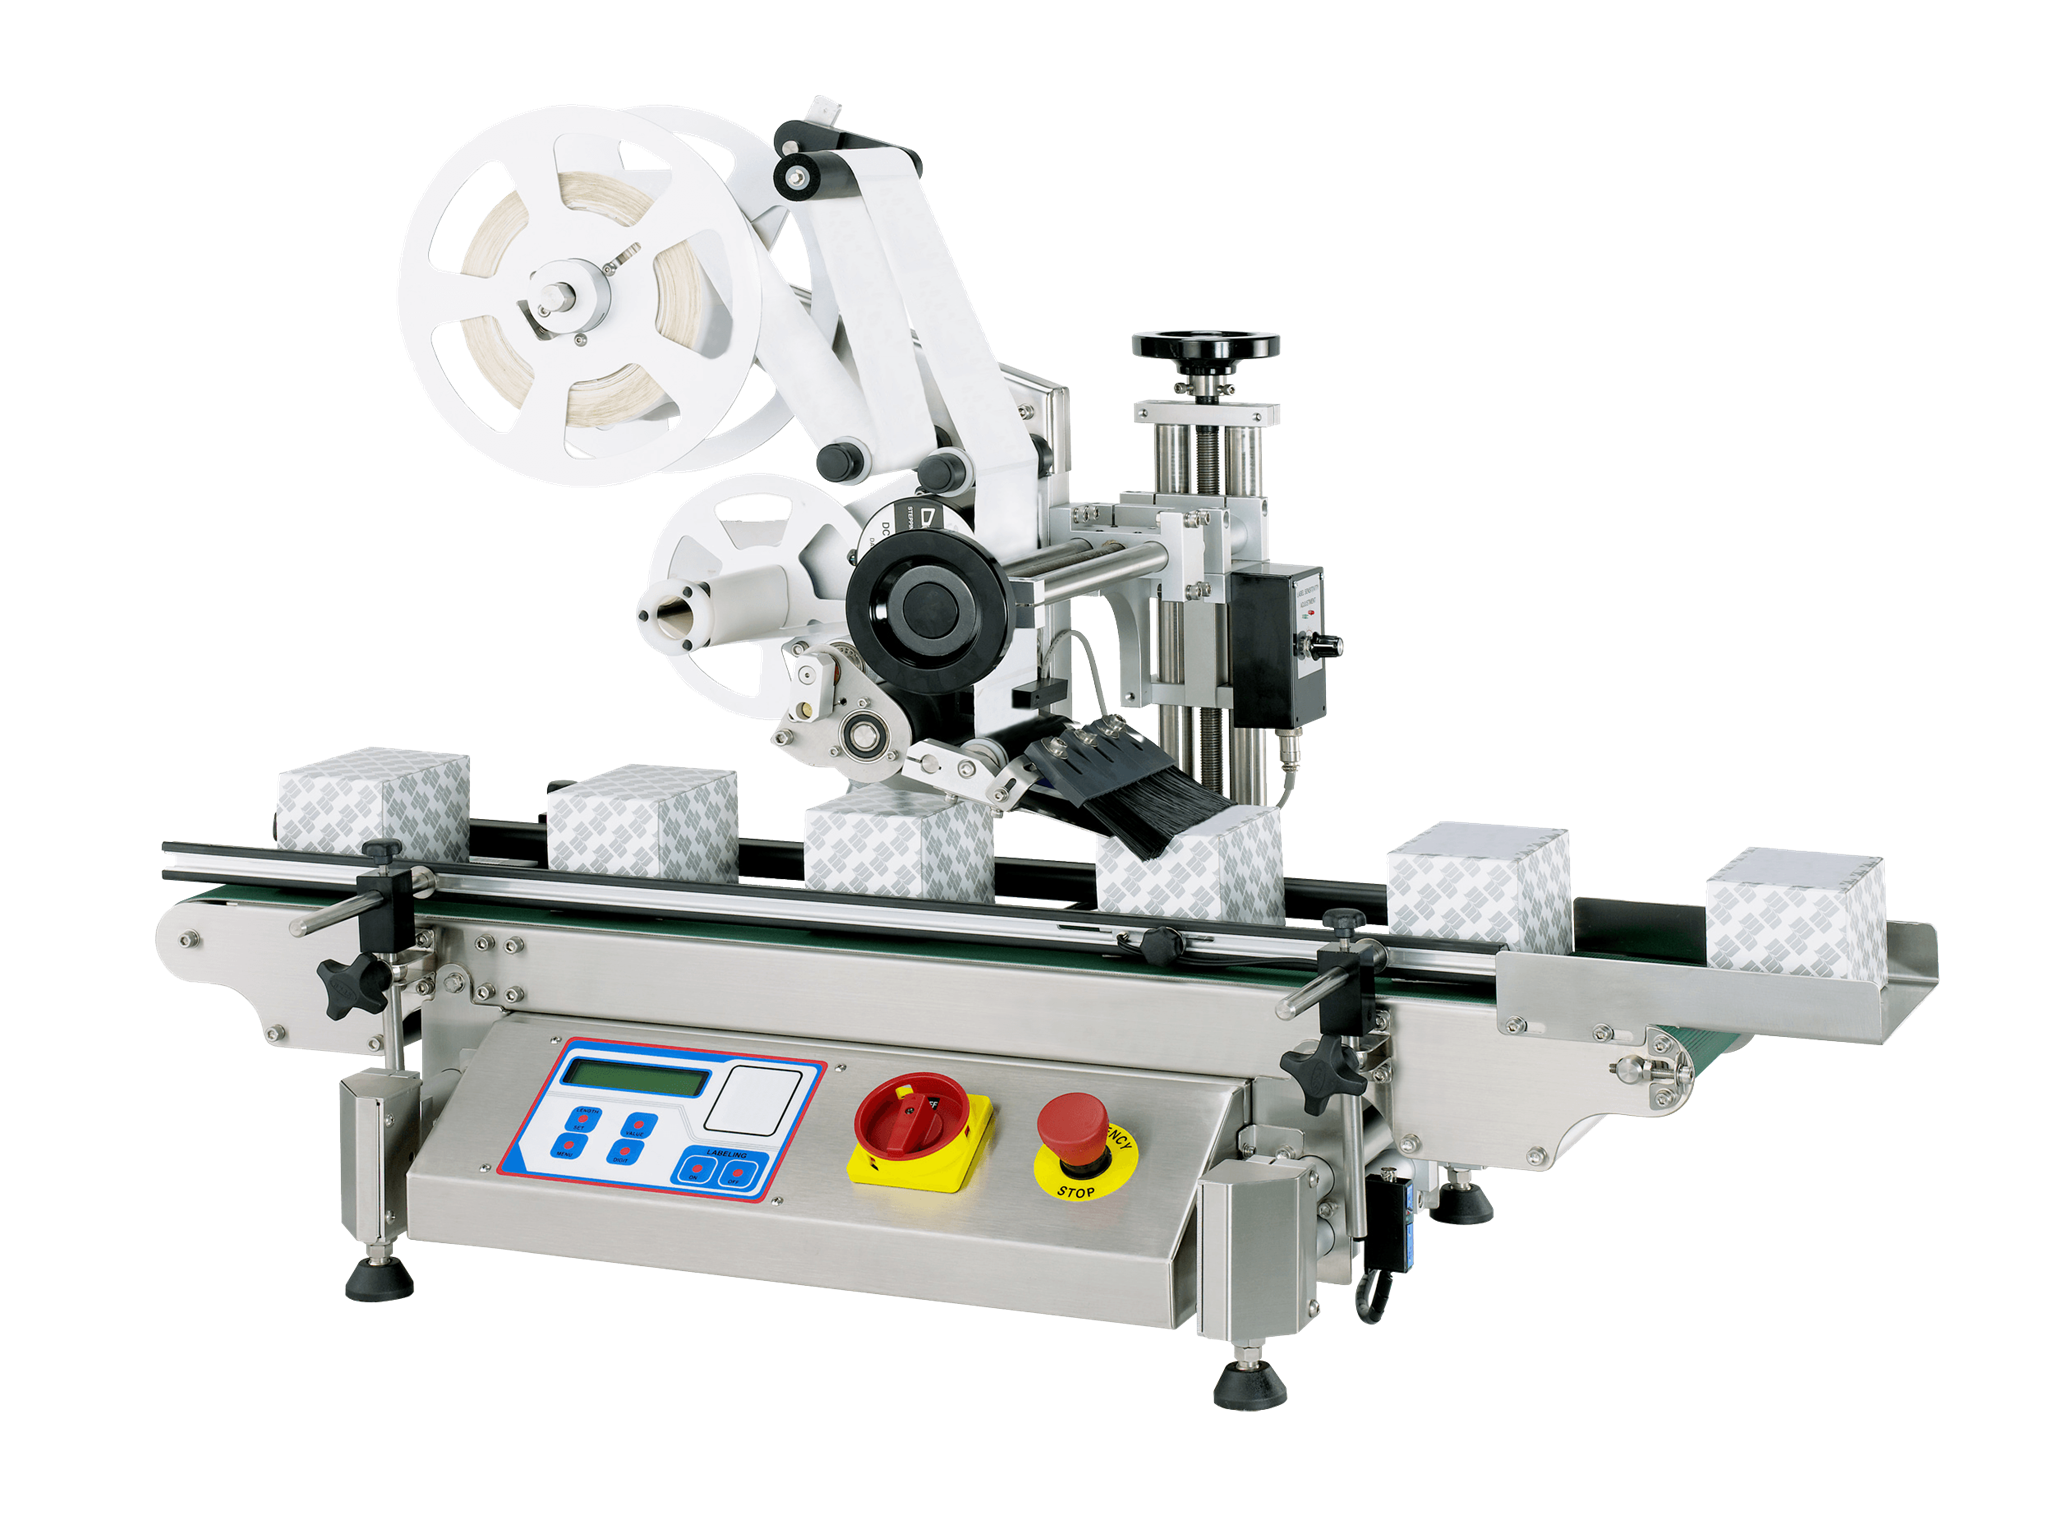 Pilt LAB8020 - Tabletop Labeling Machine for Efficient and Flexible Labeling